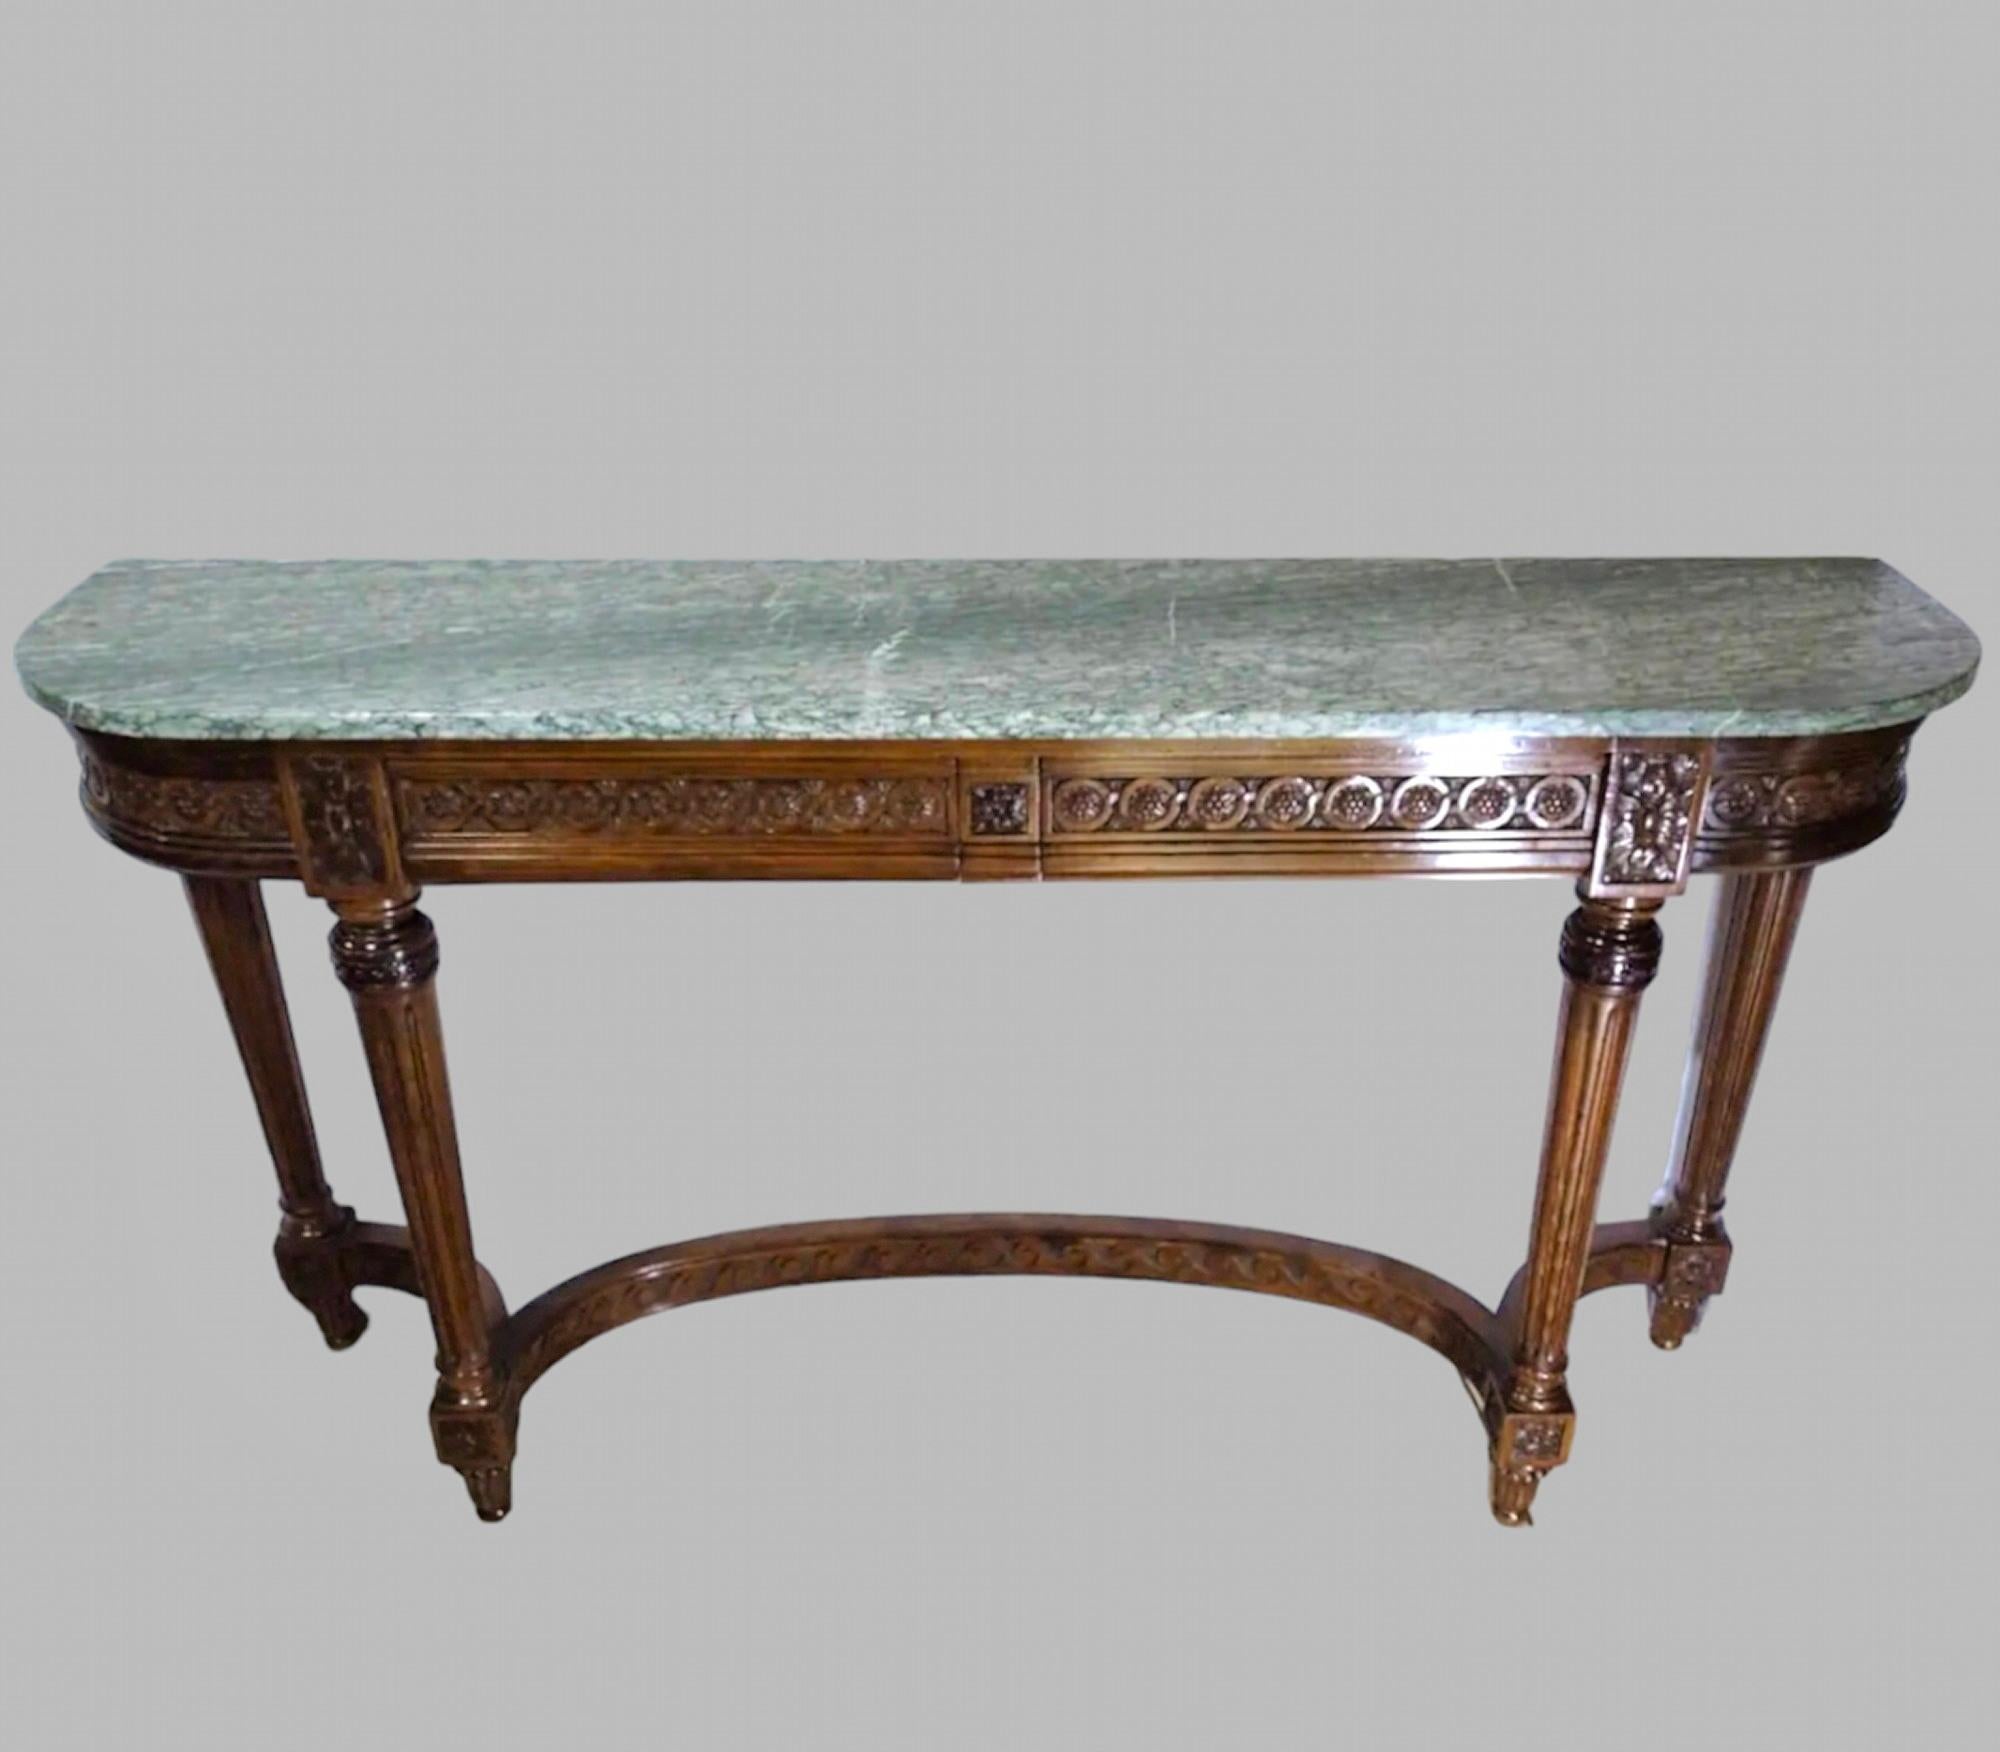 A Lovely 19th century Carved Walnut Console Table on carved and molded legs joined by a carved curved stretcher. It has two hidden drawers and an original green marble top that has two very minor chips to edges commensurate with age and patina.